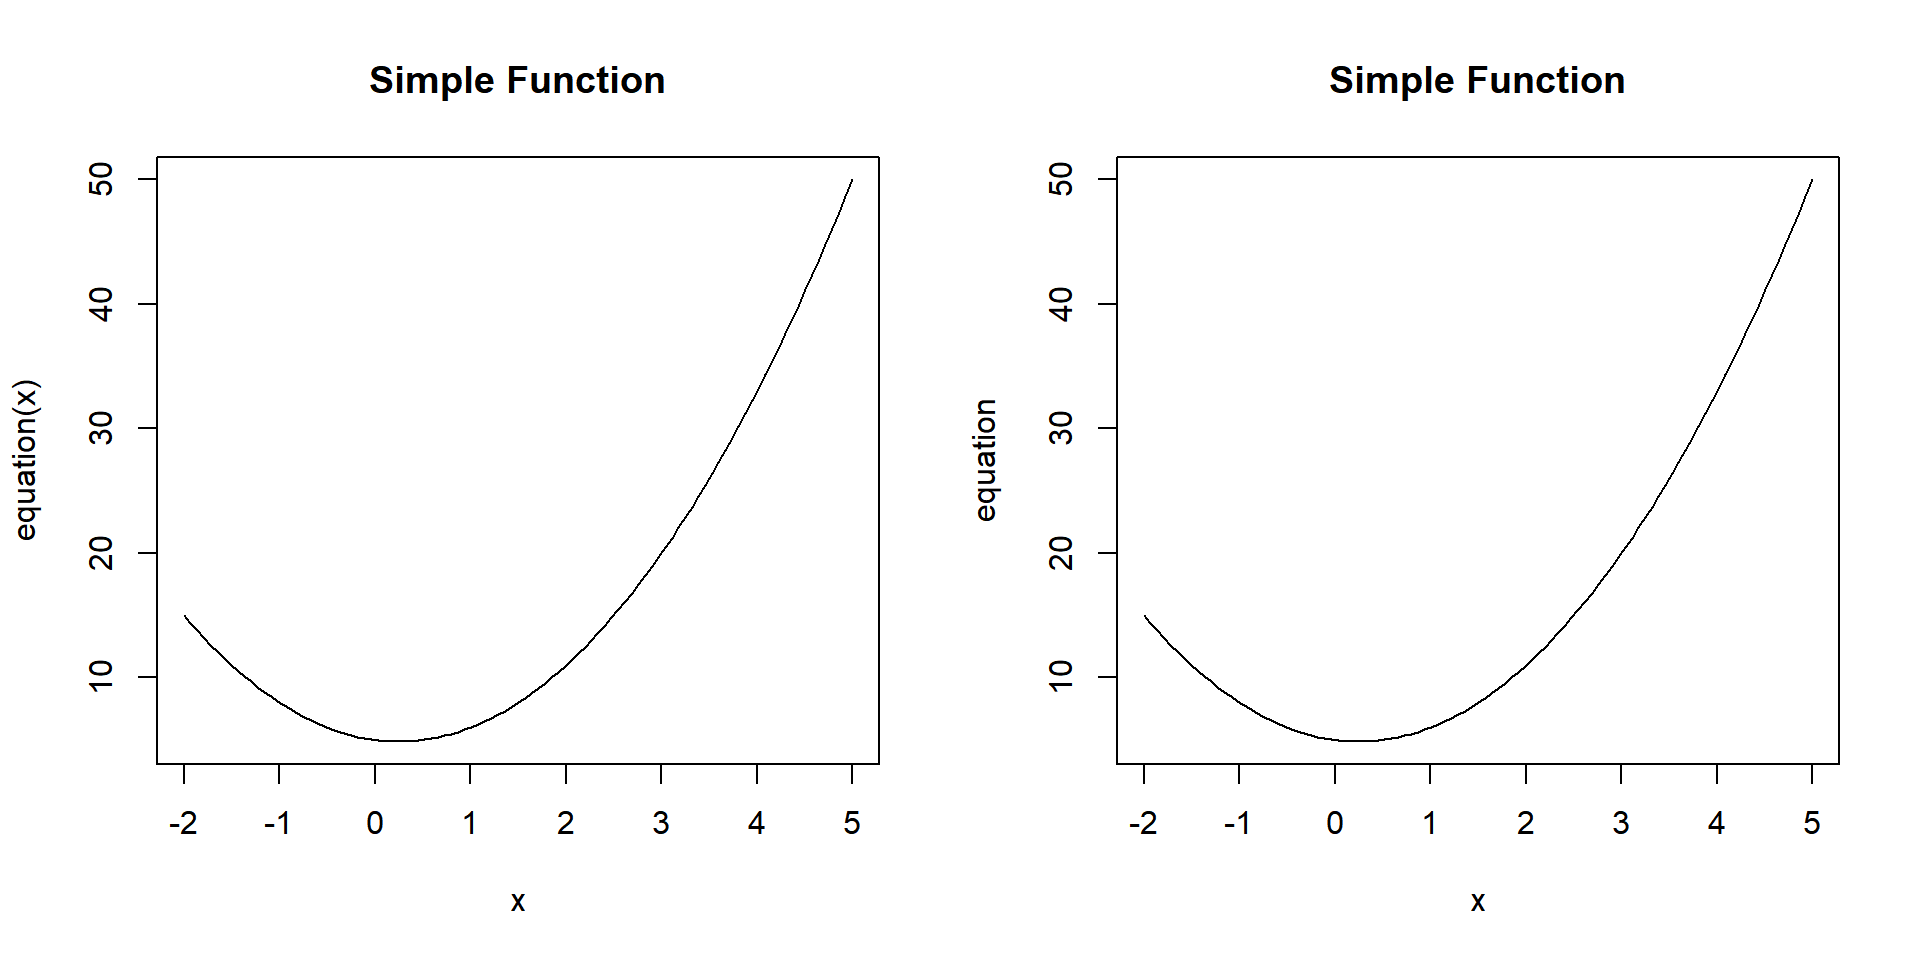 Example 2: Plotting a Simple Curved Function in R